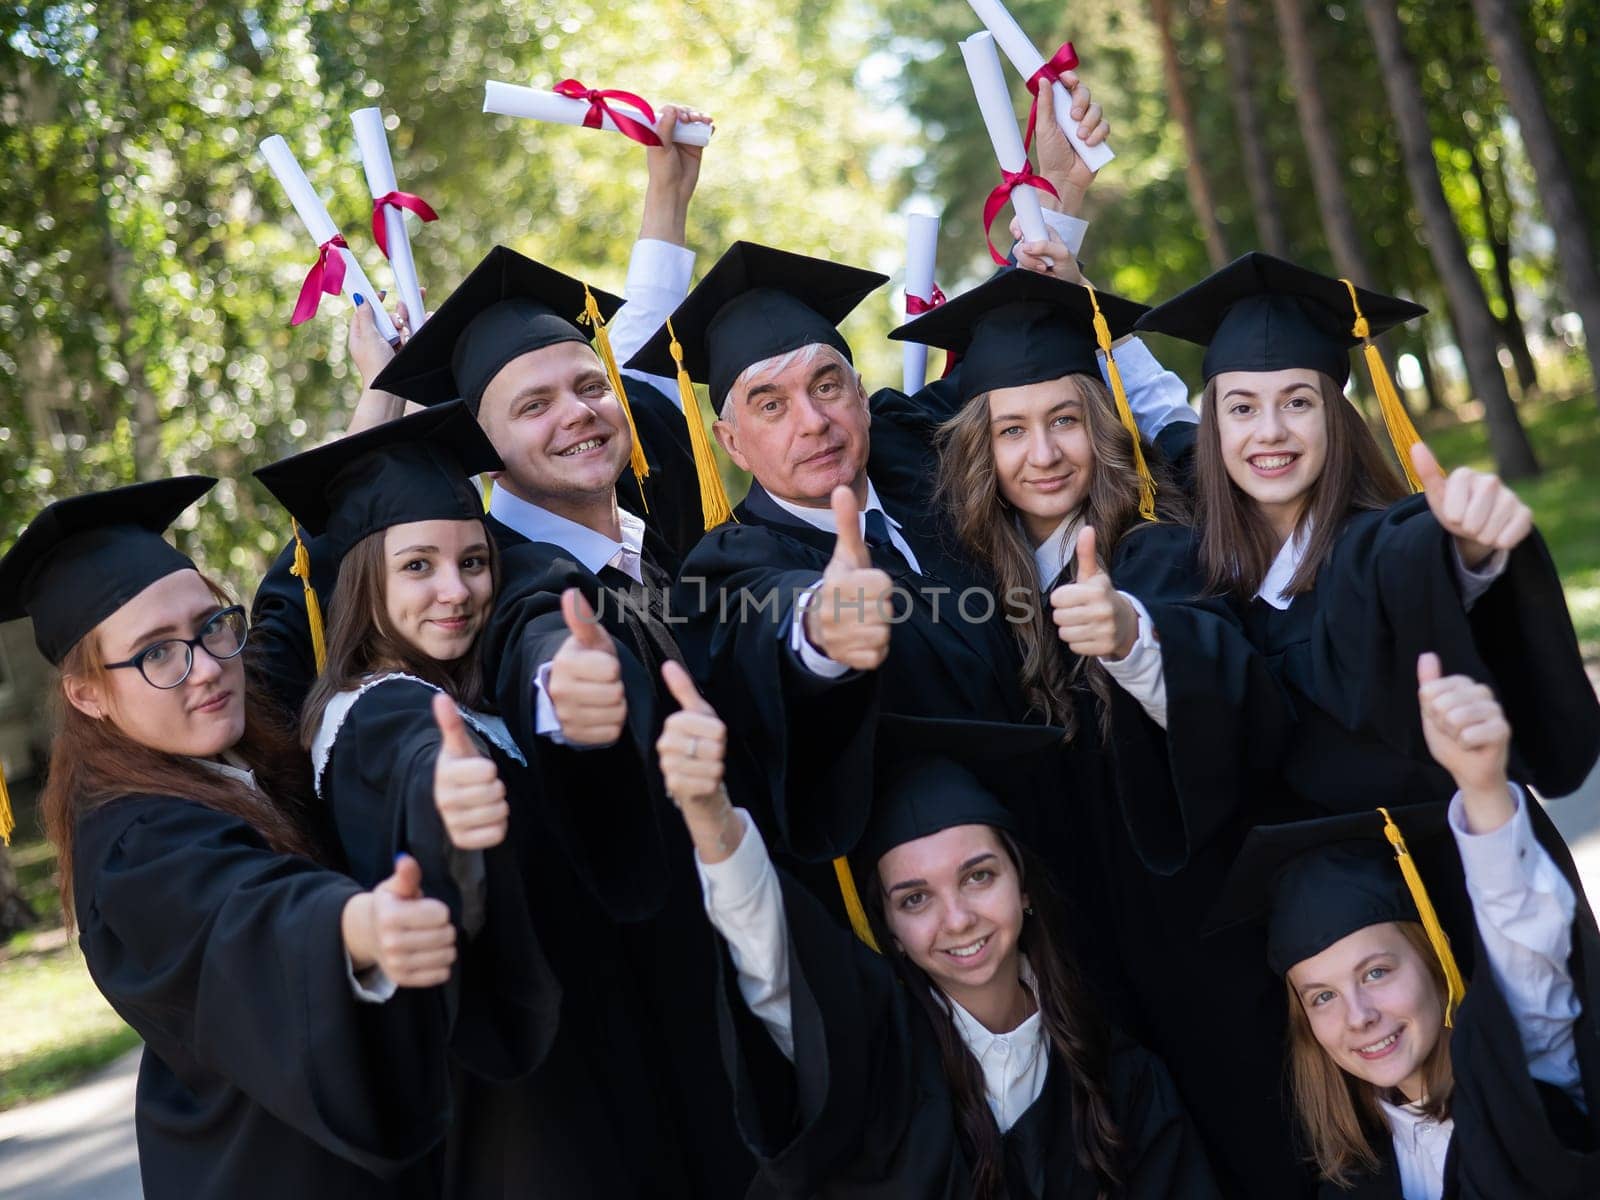 A group of graduates in robes give a thumbs up outdoors. Elderly student. by mrwed54